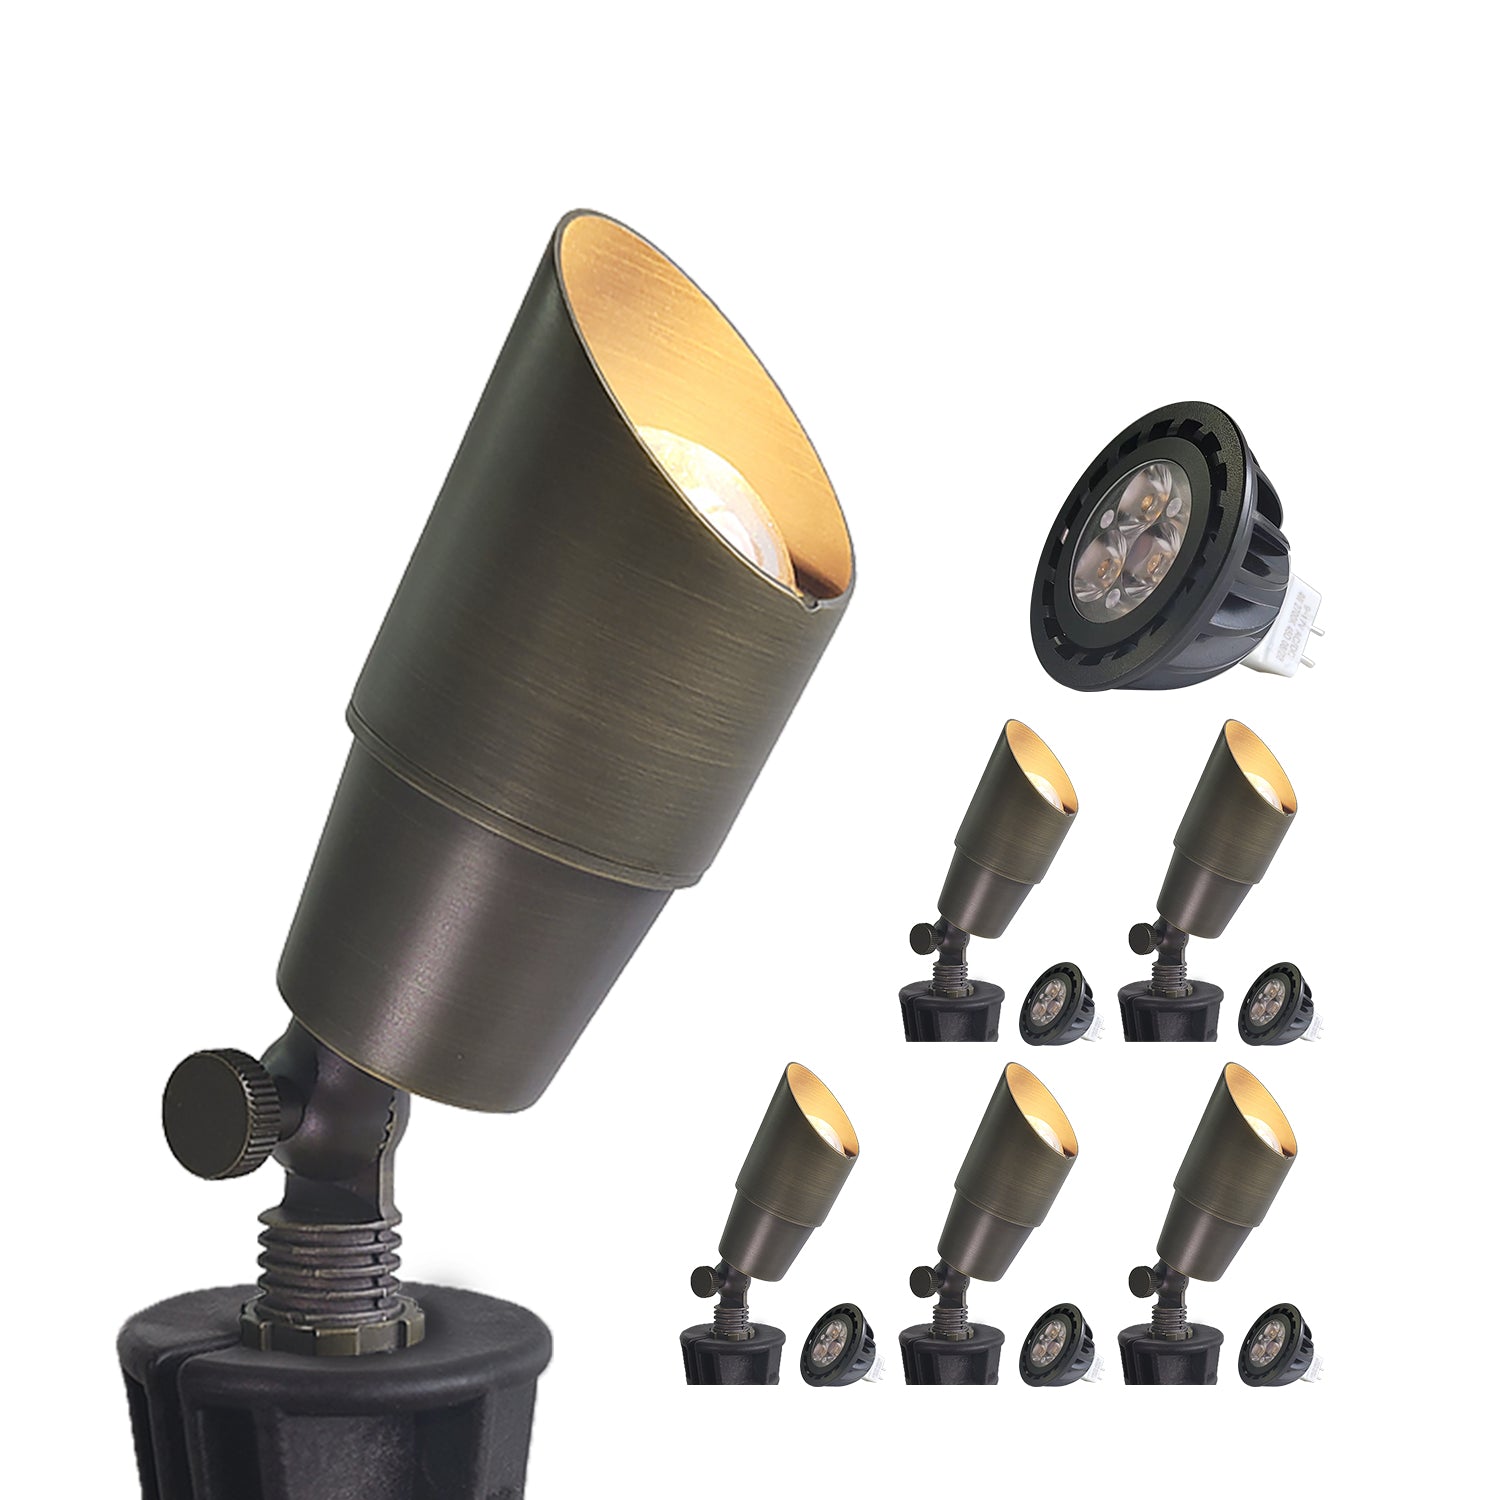 Brass LED outdoor landscape garden spotlight COA101B with adjustable angle and low voltage design